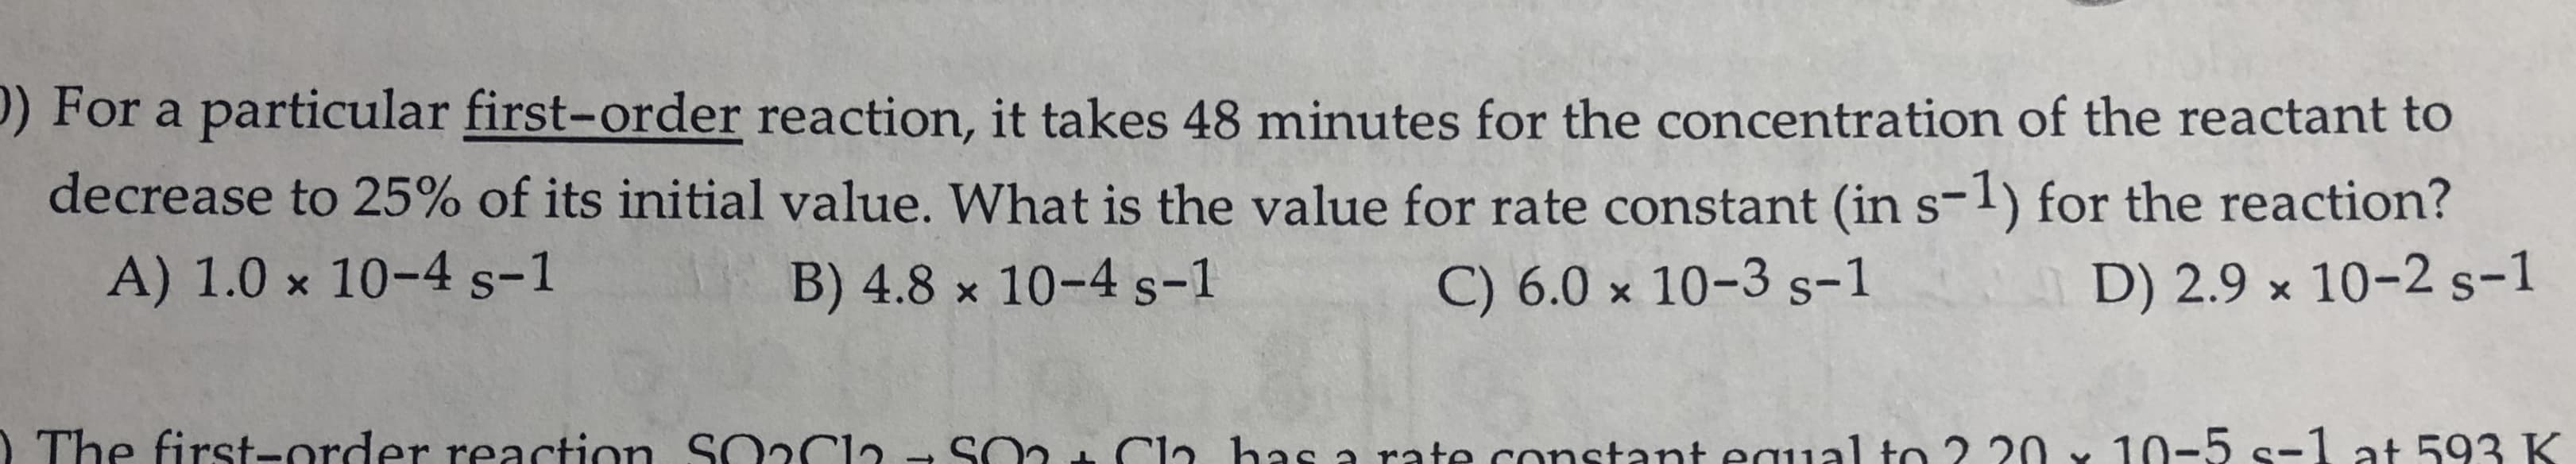 P) For a particular first-order reaction, it takes 48 minutes for the concentration of the reactant to
decrease to 25% of its initial value. What is the value for rate constant (in s-1) for the reaction?
A) 1.0 x 10-4 s-1
B) 4.8 x 10-4 s-1
C) 6.0 × 10-3 s-1
D) 2.9 x 10-2 s-1
I The first-order reaction. SO2CI2
SO2 Cla has a rato constant equal to 2 20 x 10-5 s-1 at 593 K
